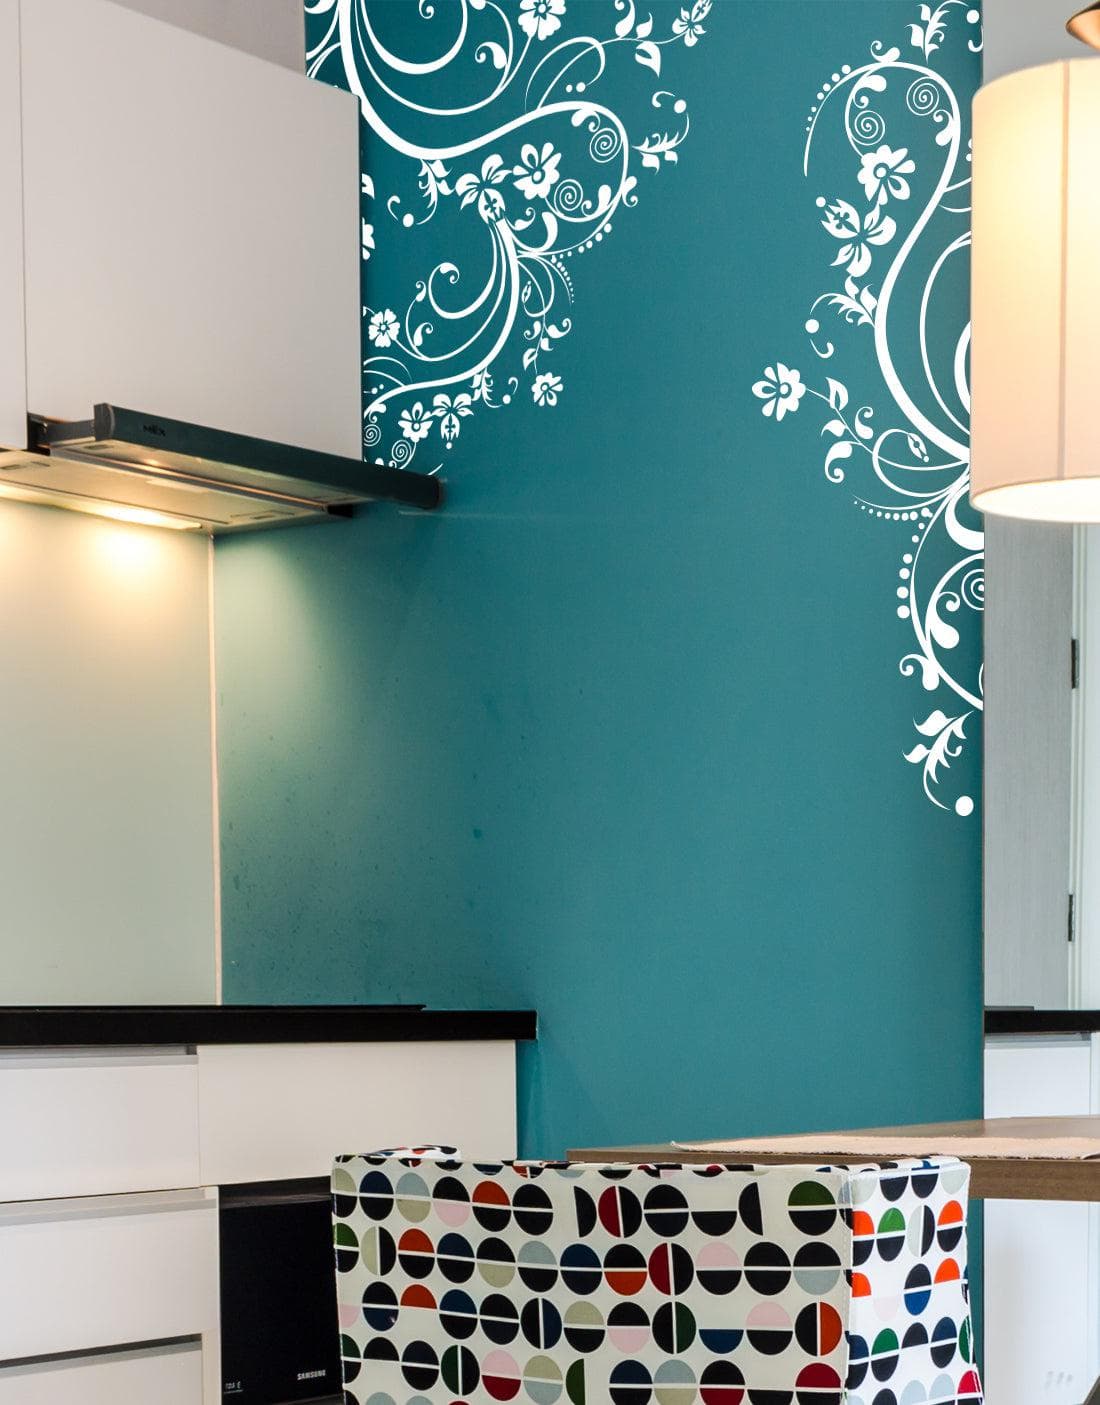 White swirling floral decals on a blue wall in a kitchen.